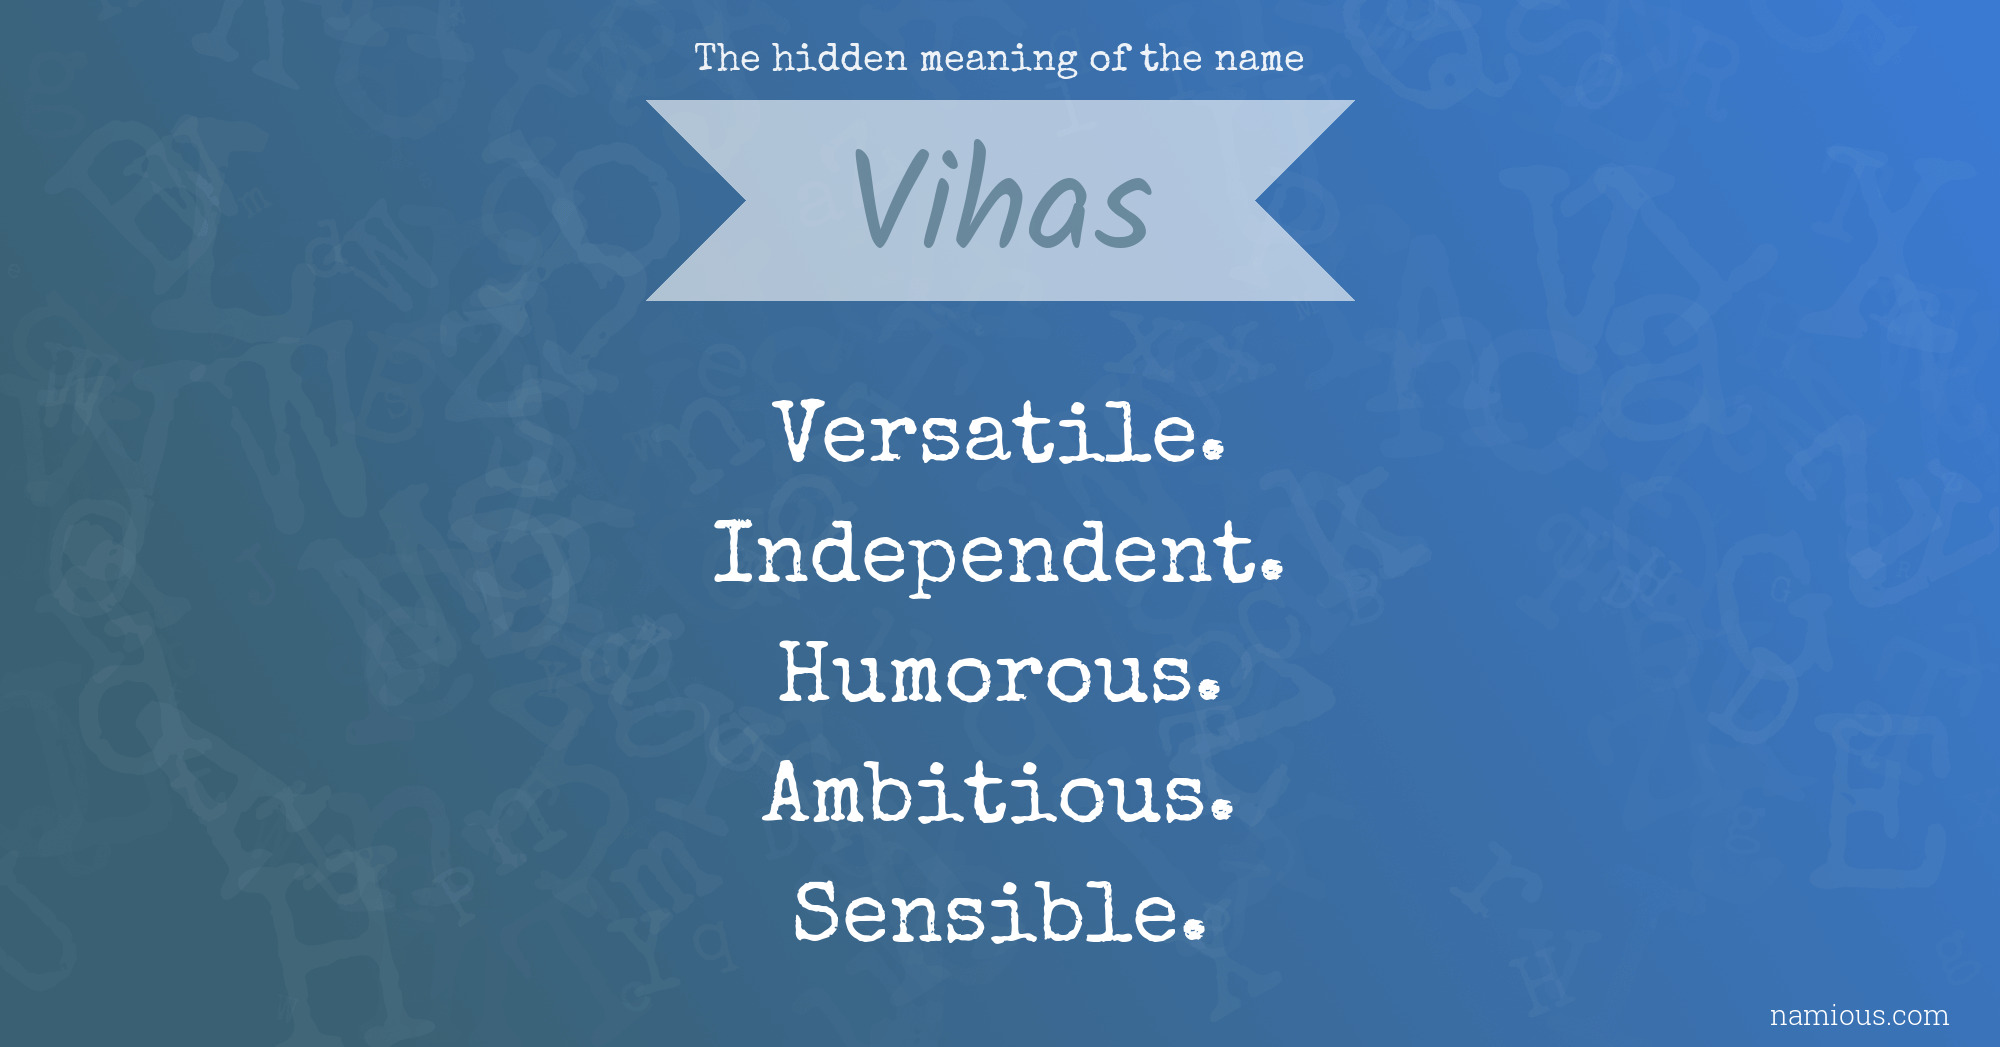 The hidden meaning of the name Vihas